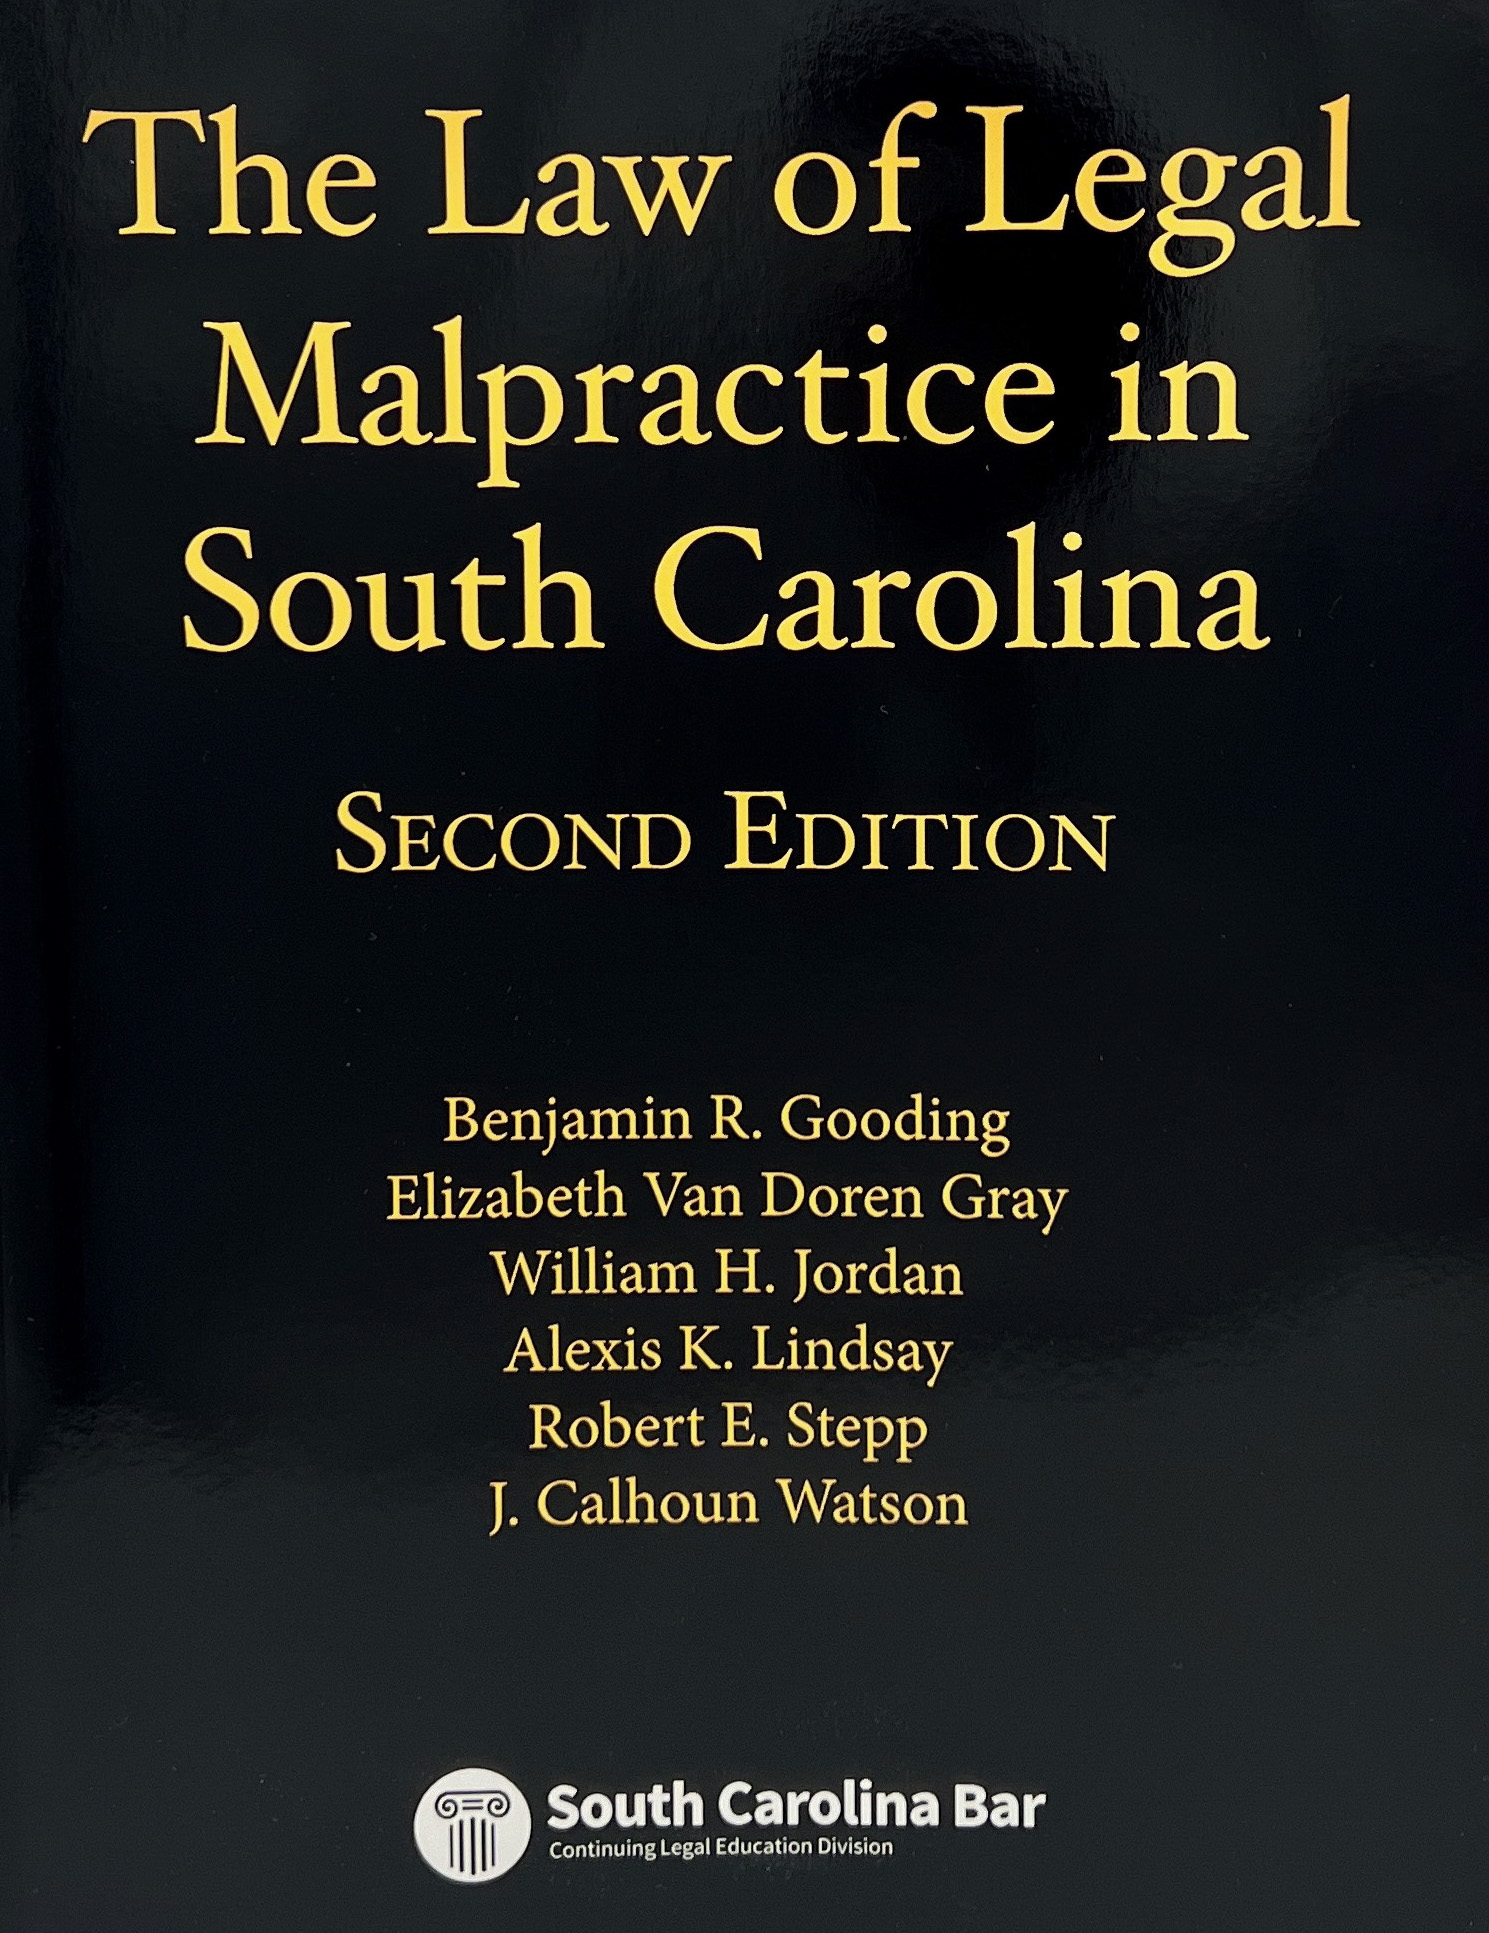 The Law of Legal Malpractice in South Carolina, Second Edition (2021)